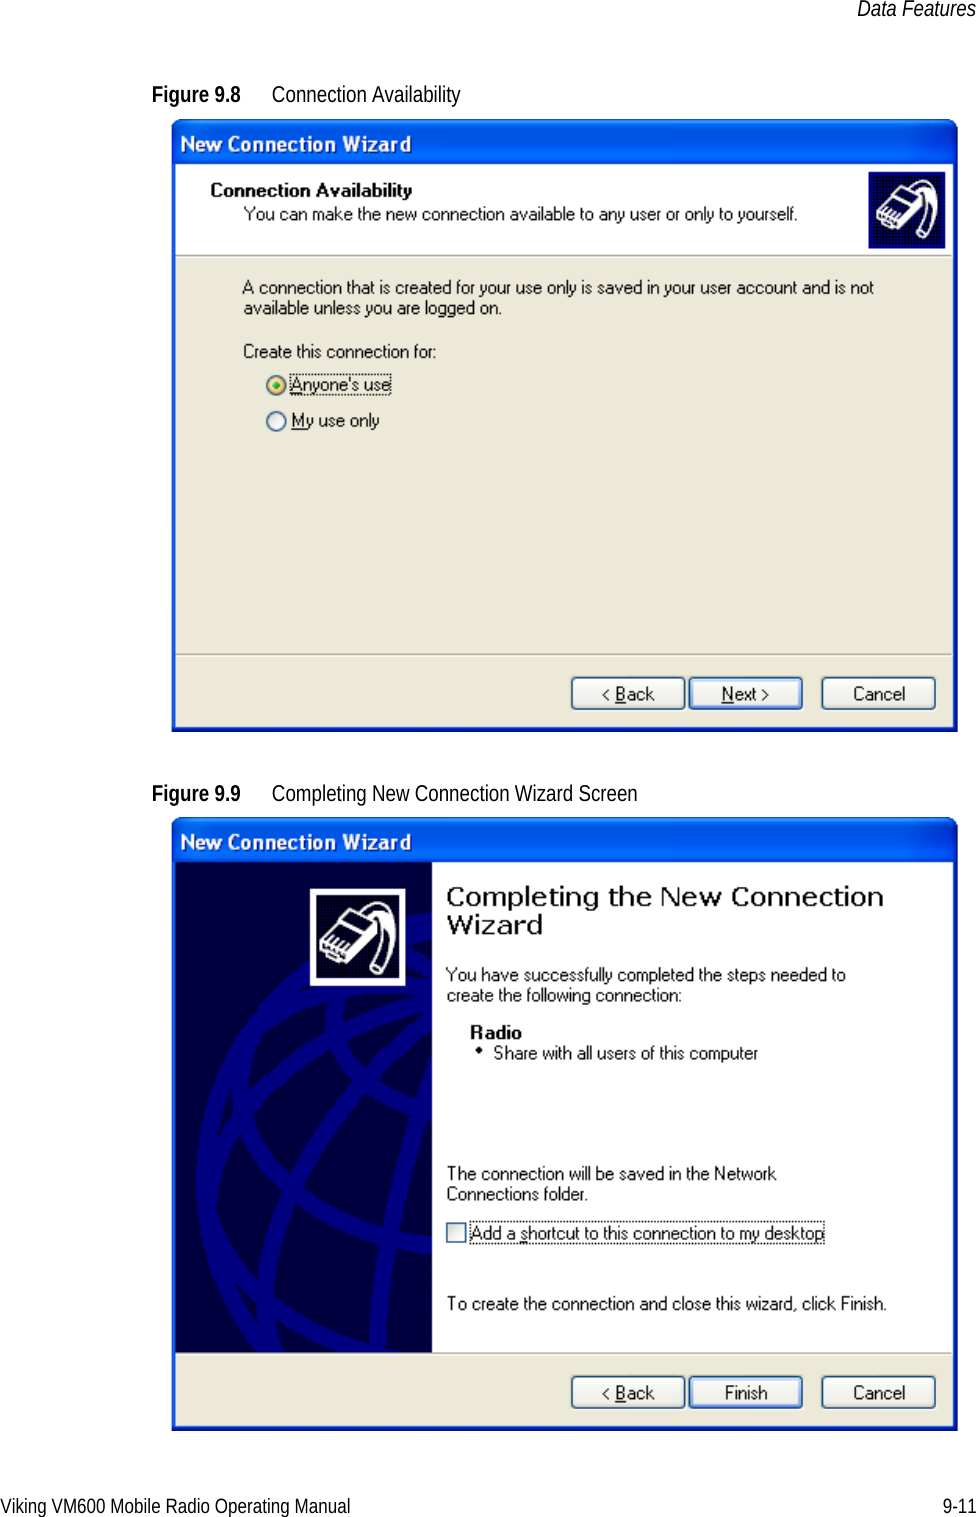 Viking VM600 Mobile Radio Operating Manual 9-11Data FeaturesFigure 9.8 Connection AvailabilityFigure 9.9 Completing New Connection Wizard ScreenDraft 4/29/2014